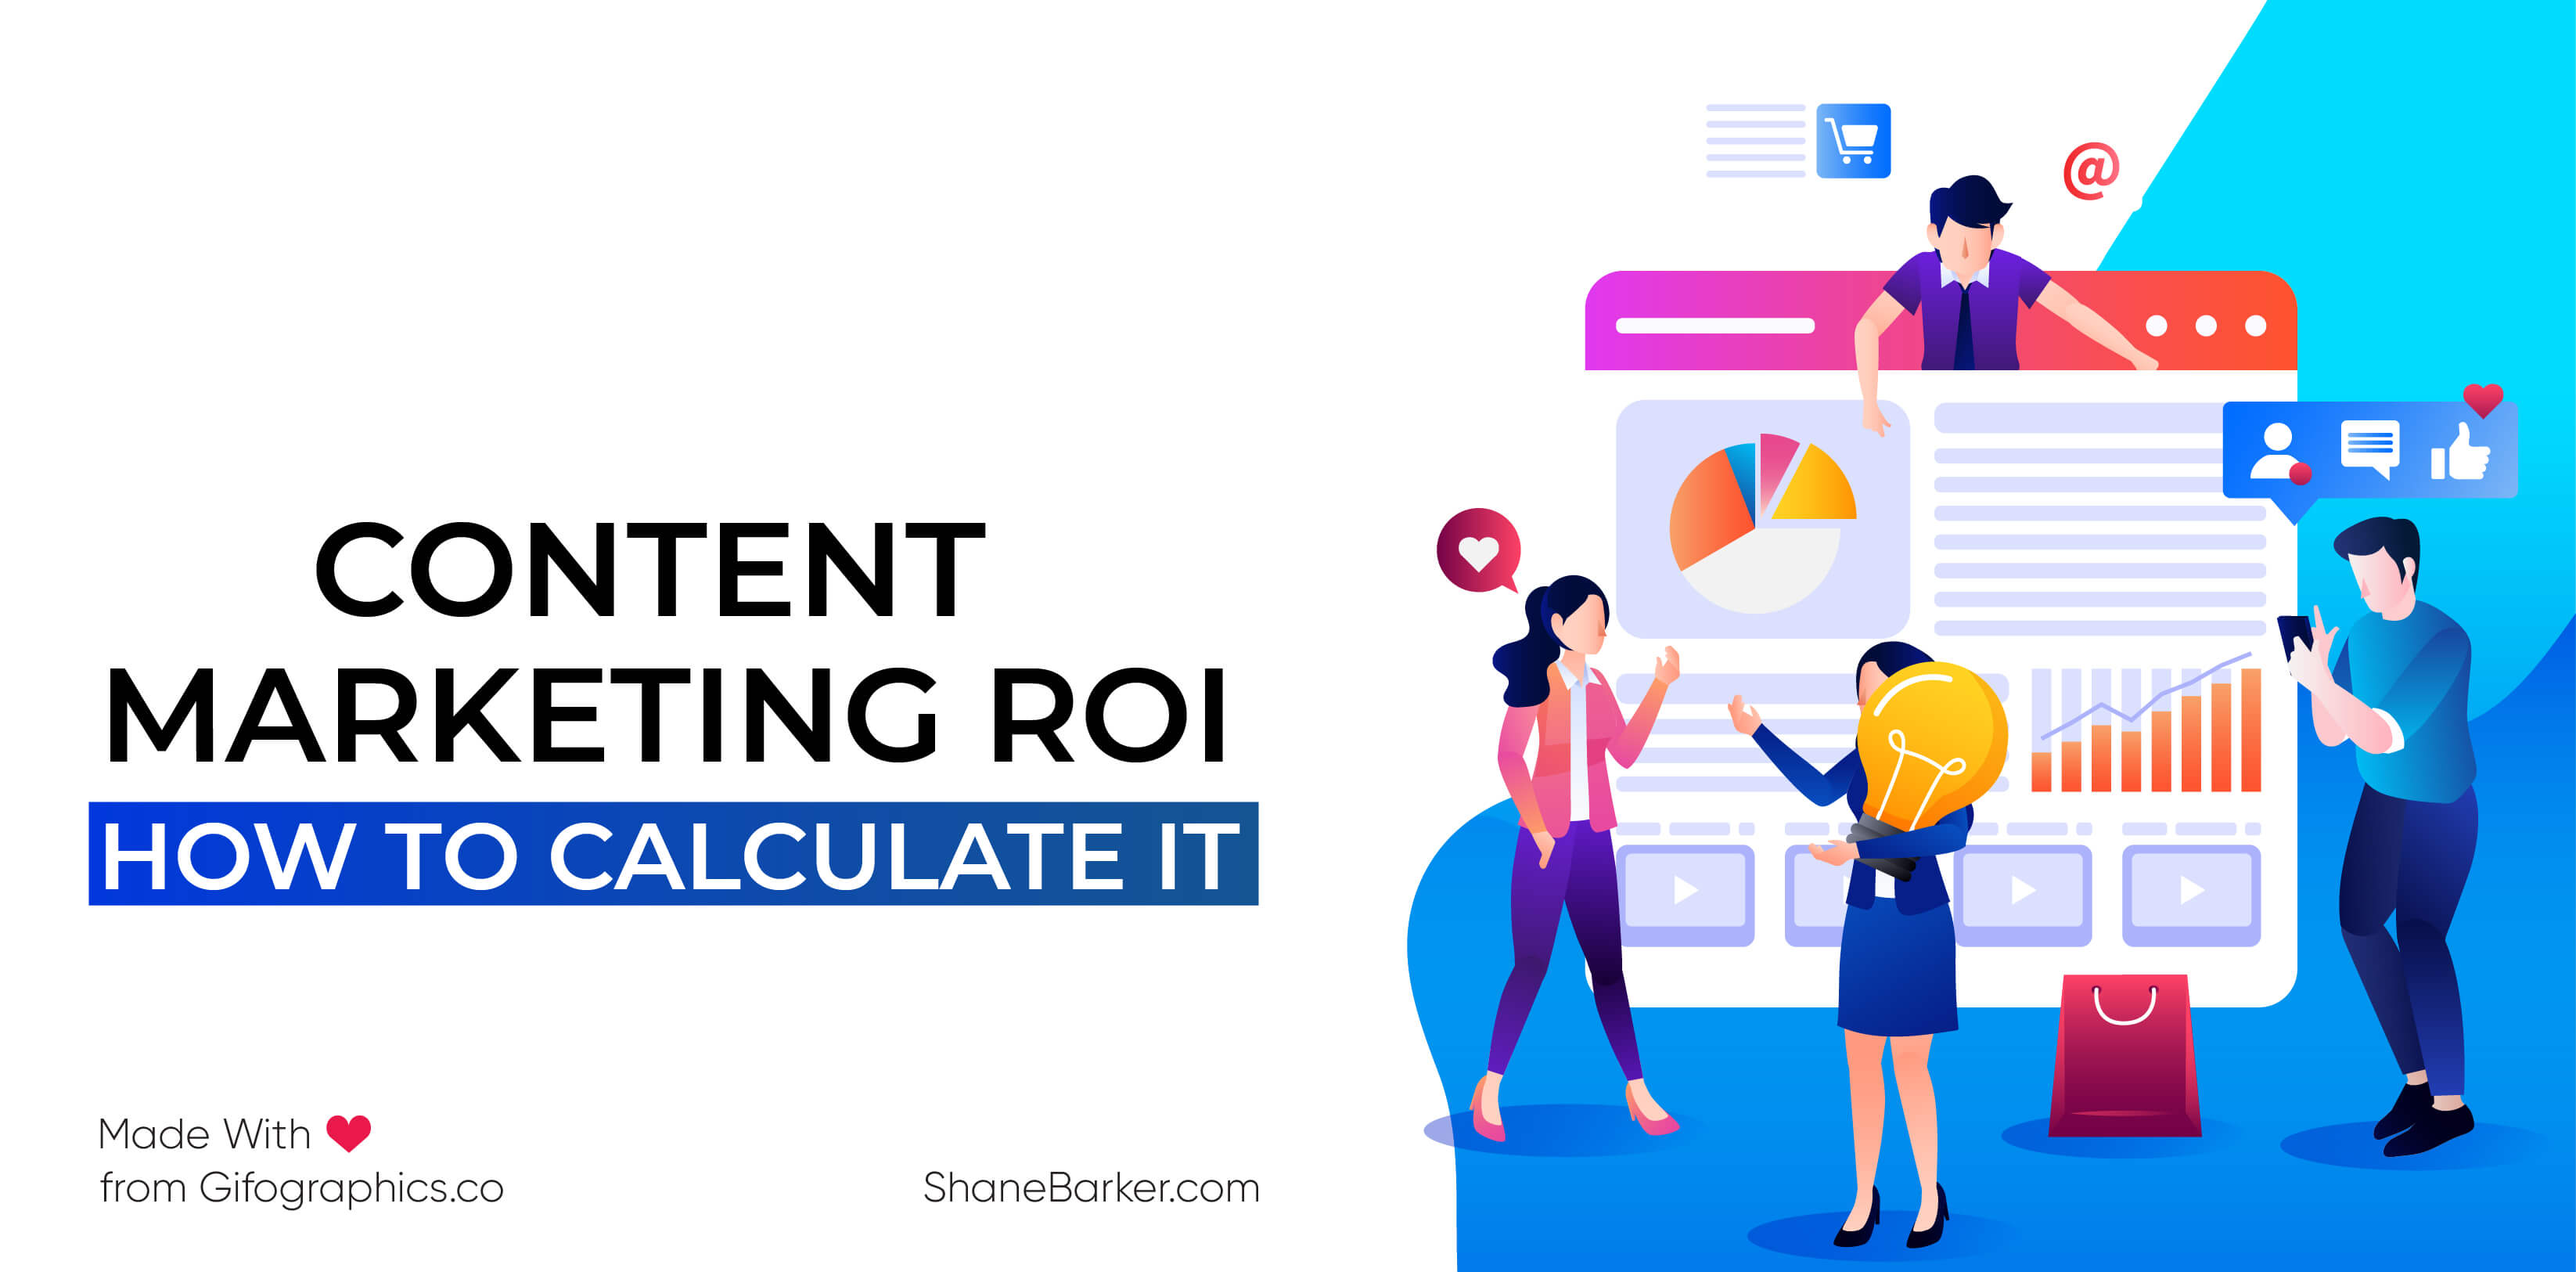 Content Marketing ROI How to Calculate It